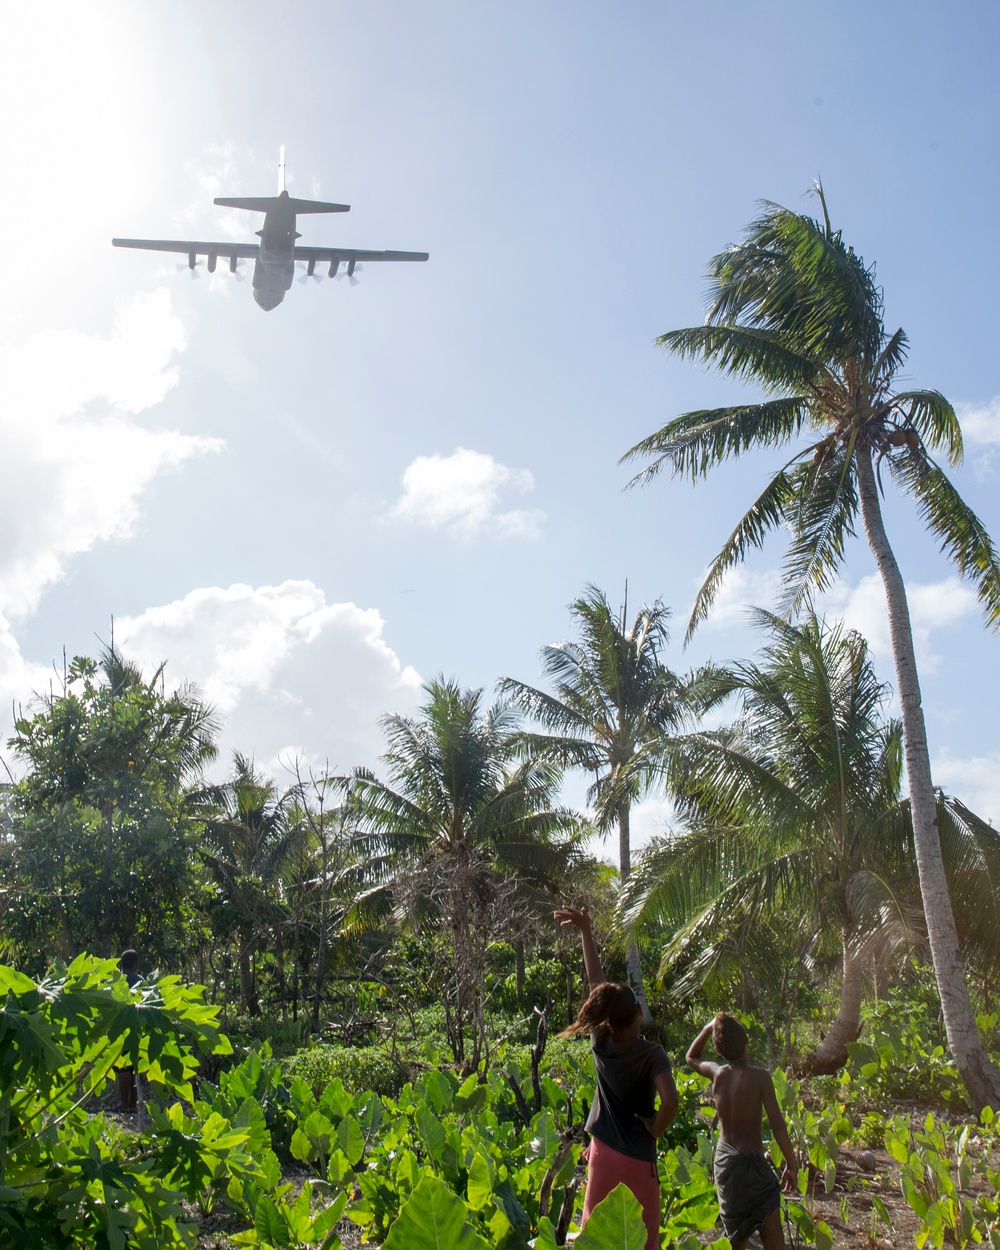 Operation Christmas Drop 2015: Extraordinary views from outer islands